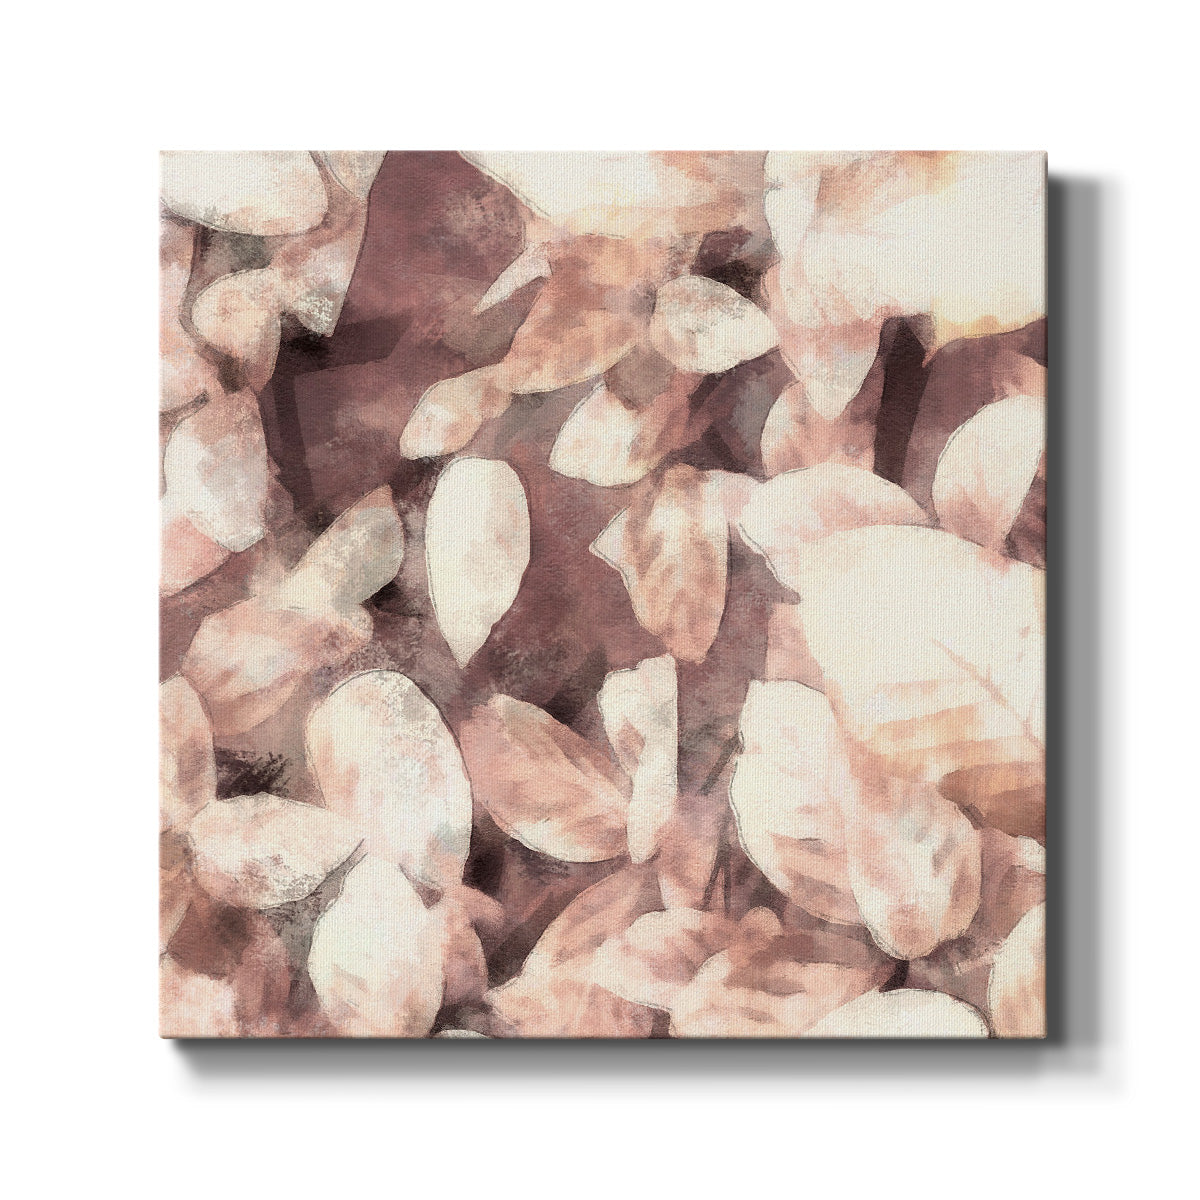 Custom Ocean Cameo III-Premium Gallery Wrapped Canvas - Ready to Hang